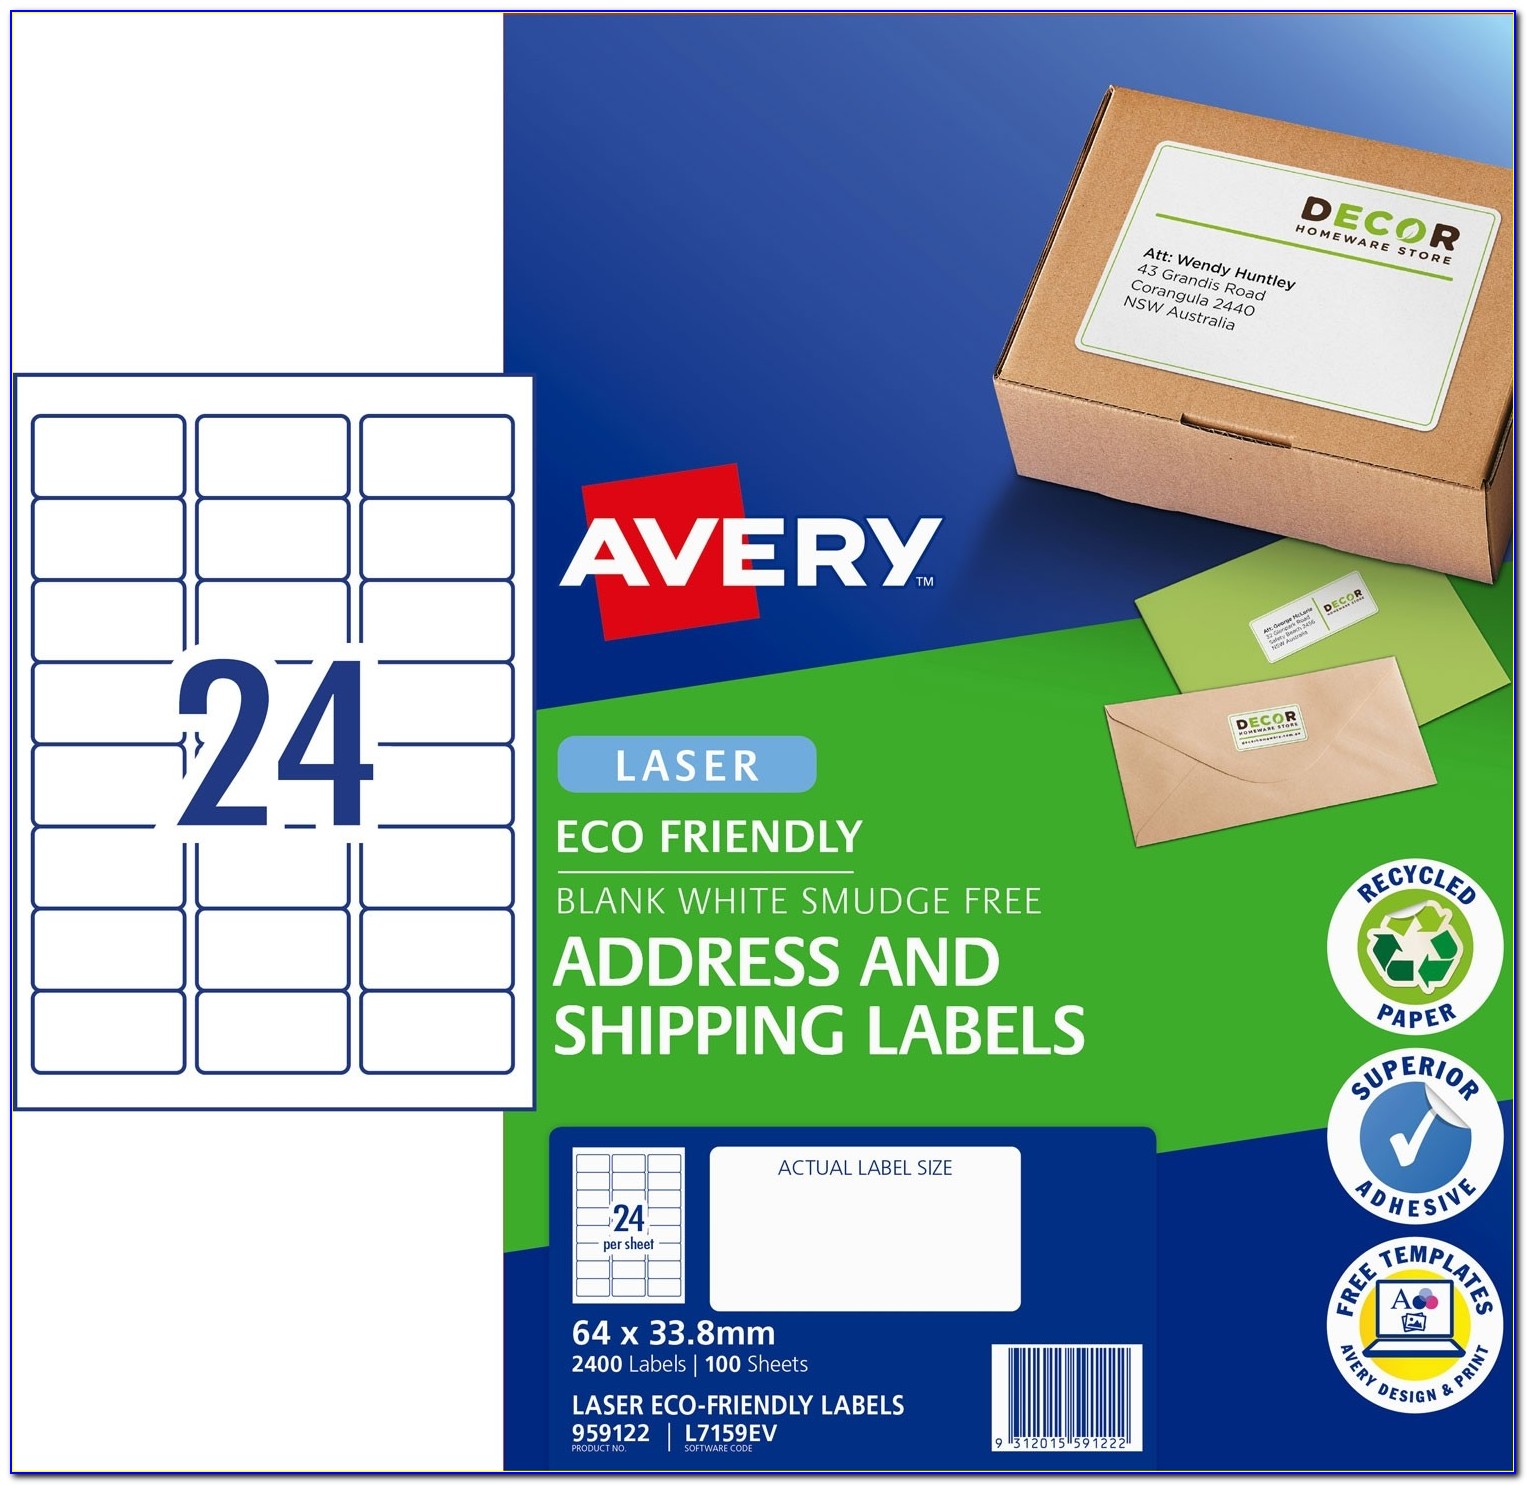 avery-easy-peel-labels-5160-template